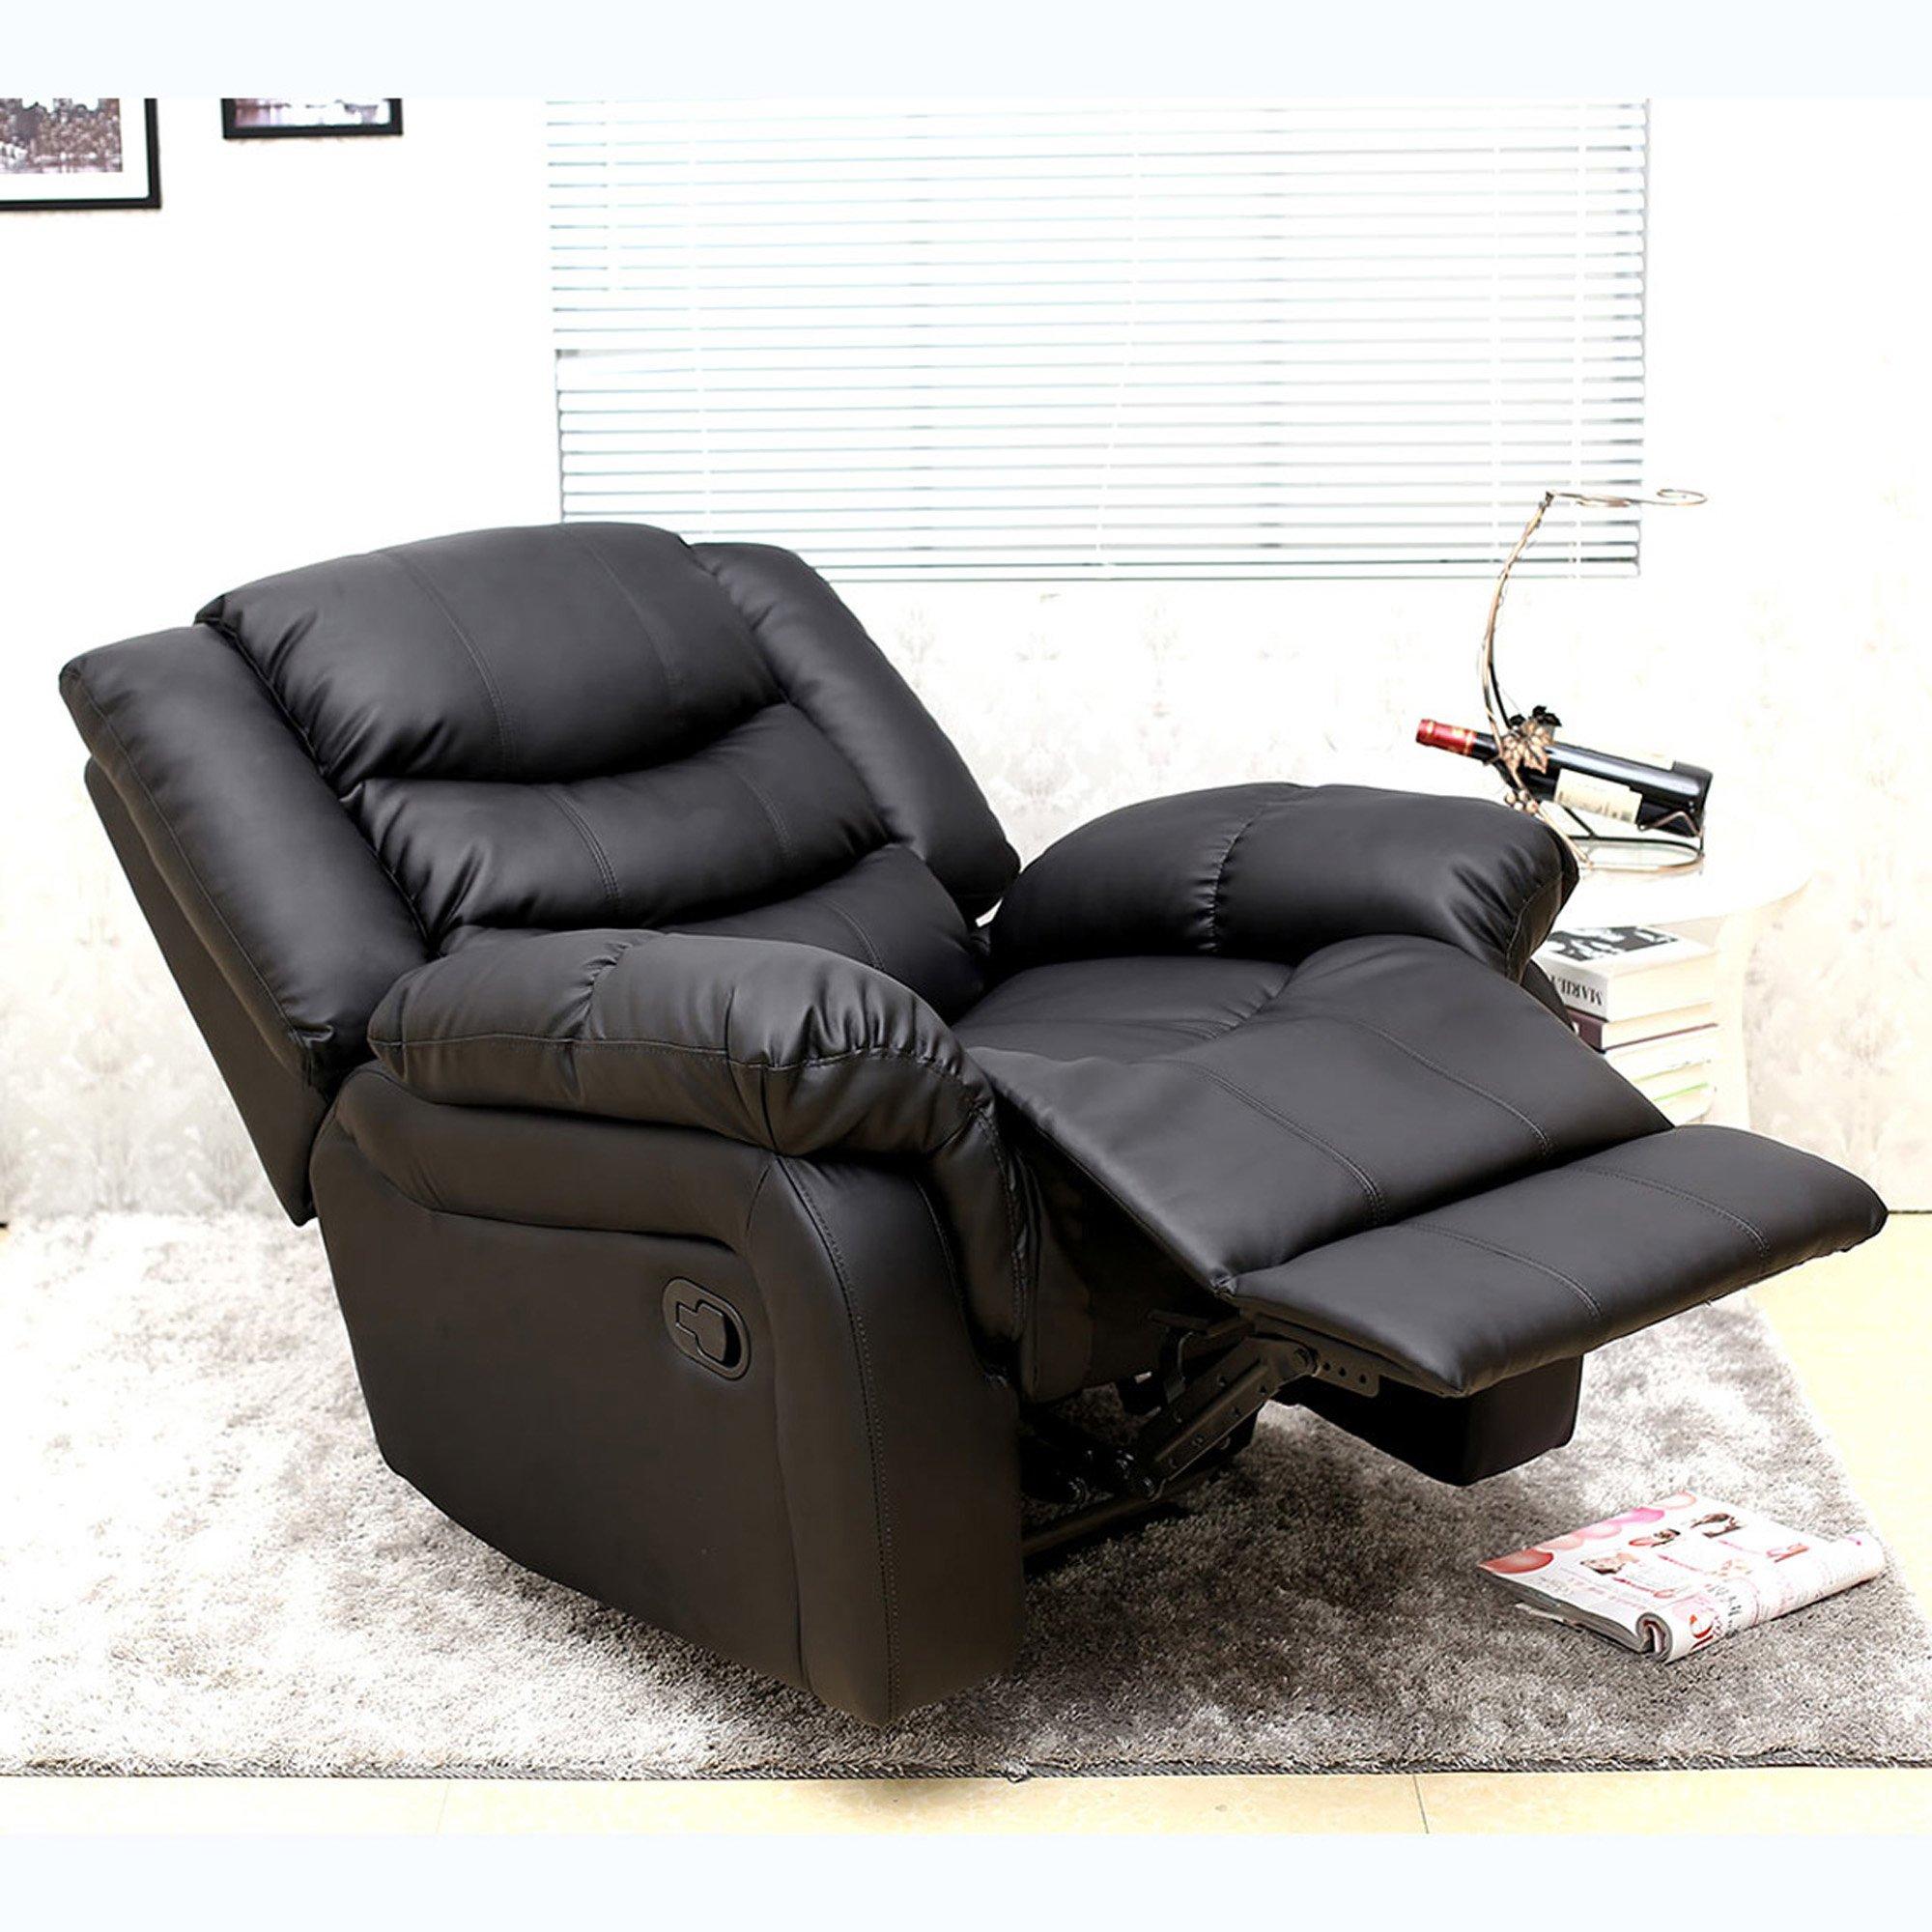 Seattle Manual Recliner Armchair Home Lounge Bonded Leather Chair